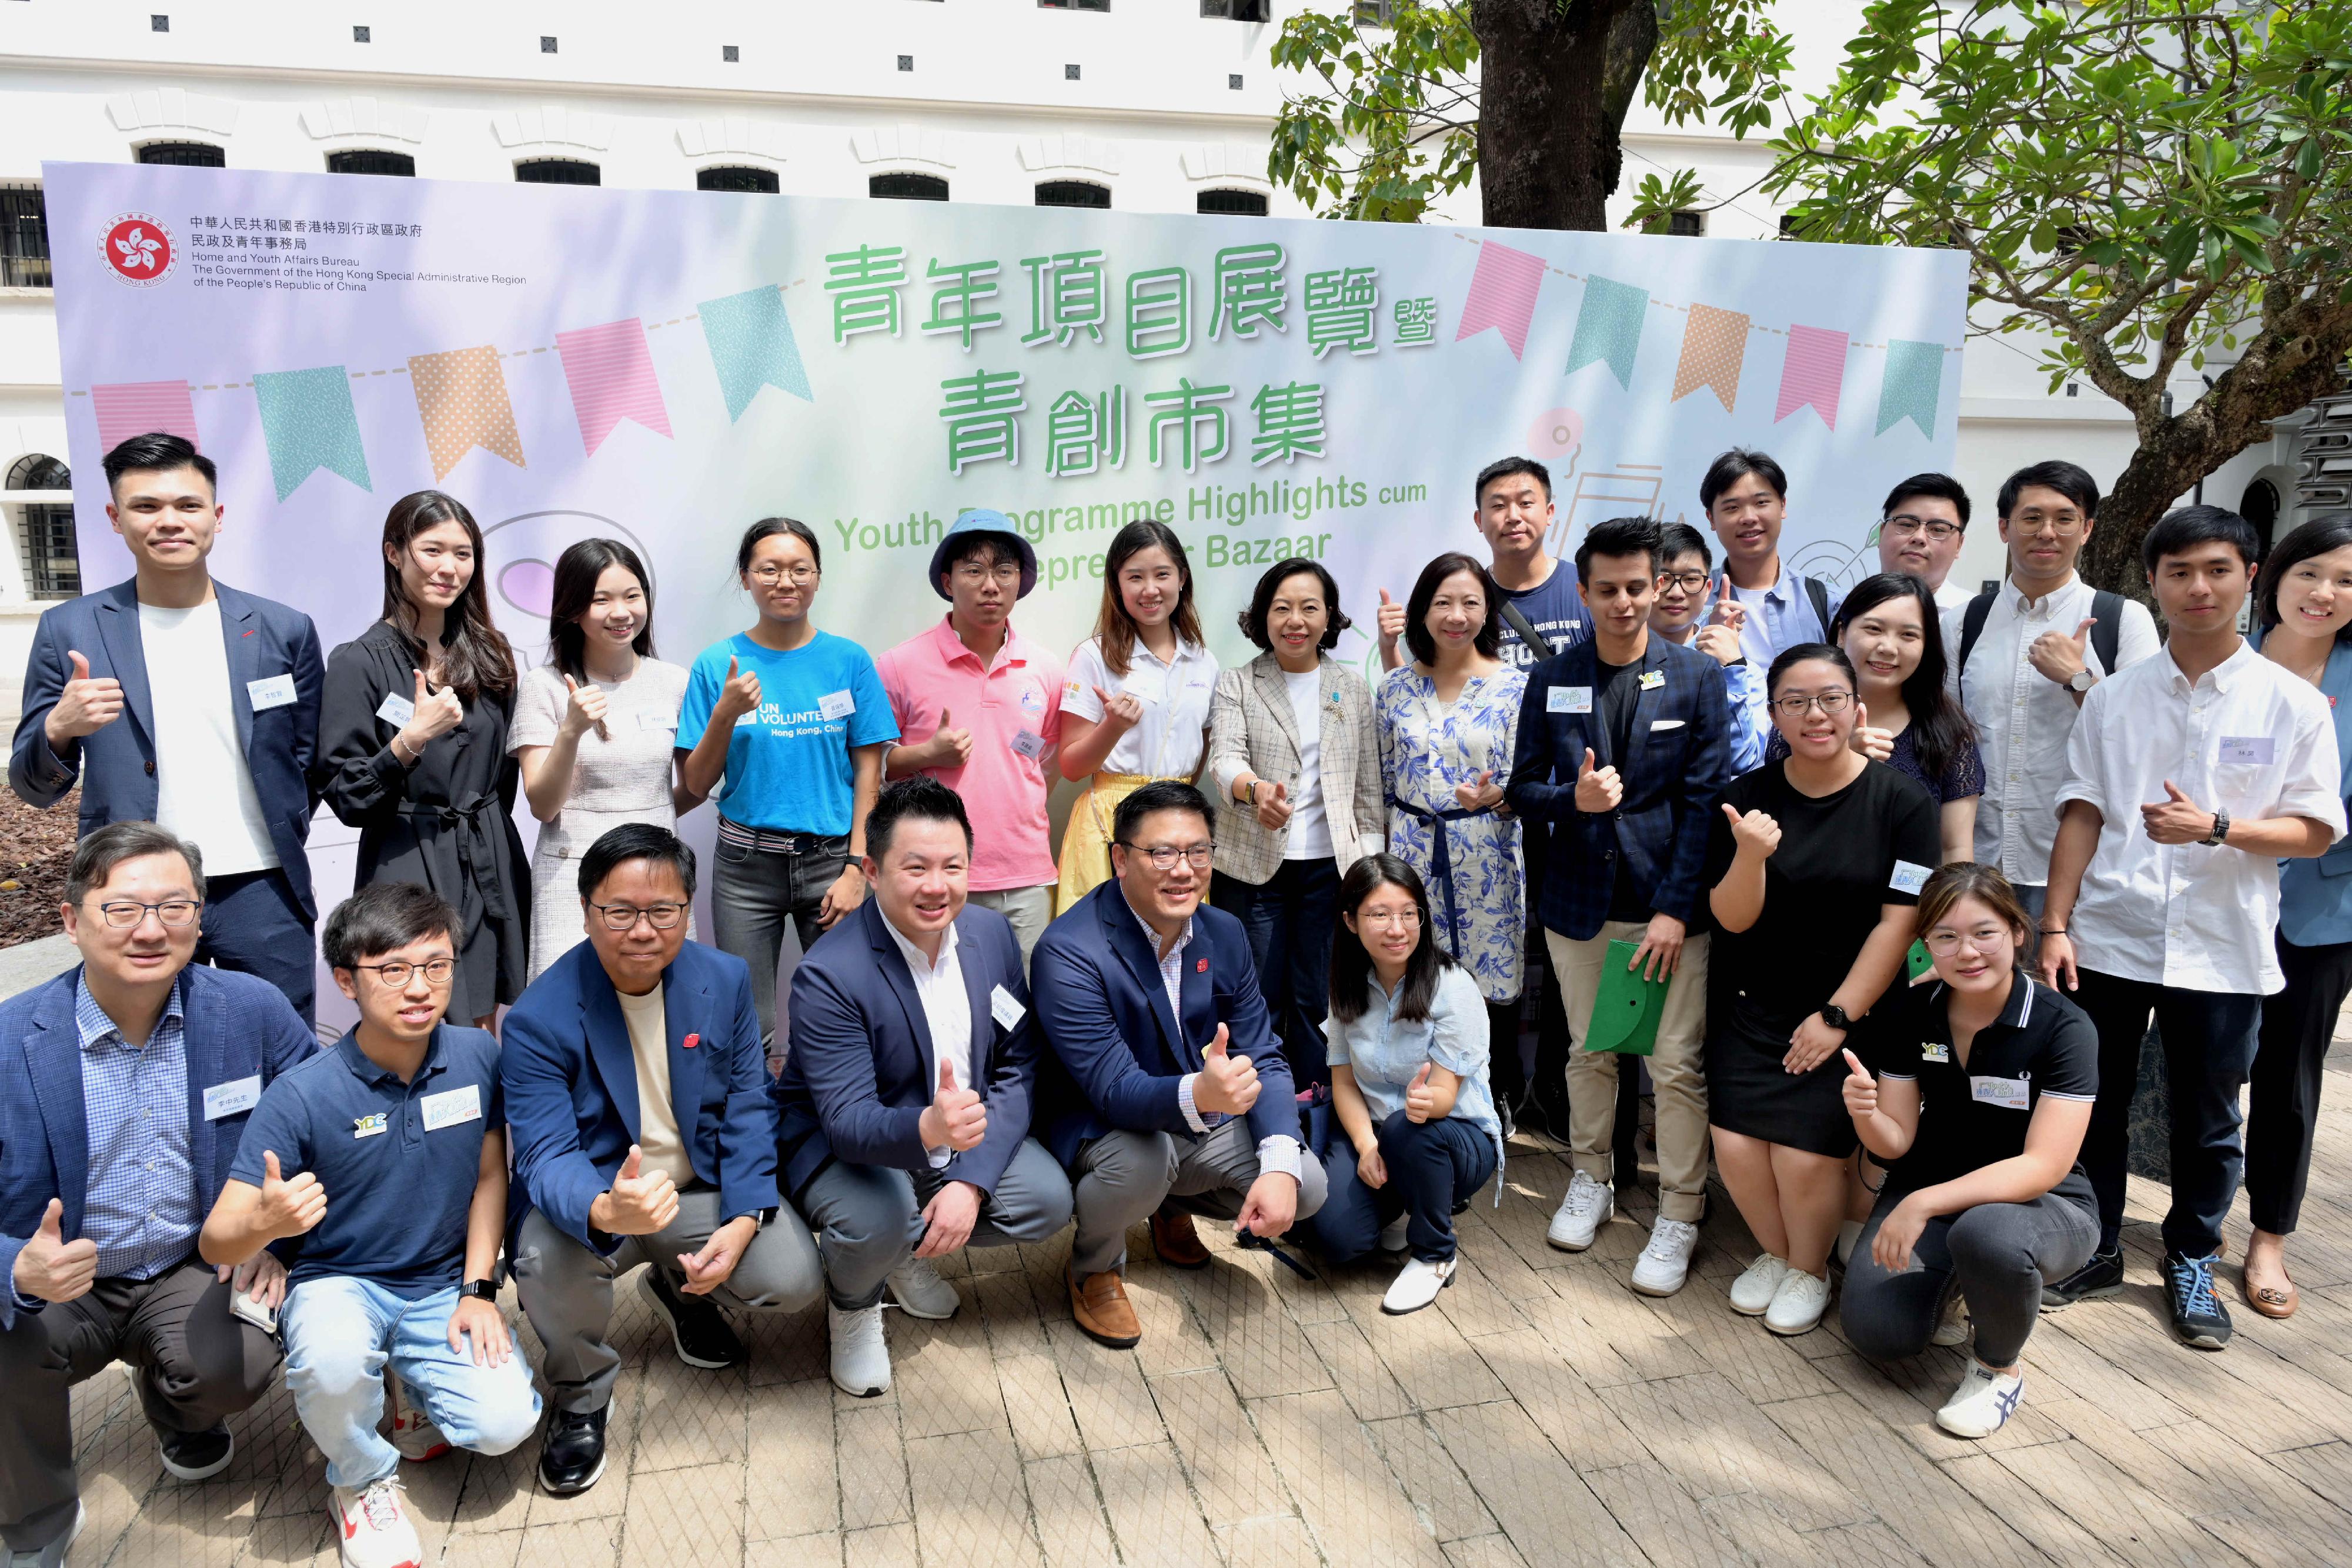 The Youth Programmes Highlights cum Entrepreneur Bazaar was held today (September 30). Photo shows the Secretary for Home and Youth Affairs, Miss Alice Mak (back row, seventh left); the Permanent Secretary for Home and Youth Affairs, Ms Shirley Lam (back row, eighth left); the Under Secretary for Home and Youth Affairs, Mr Clarence Leung (front row, fifth left); the Vice-Chairman of the Youth Development Commission, Mr Kenneth Leung (front row, fourth left), and youth representatives.